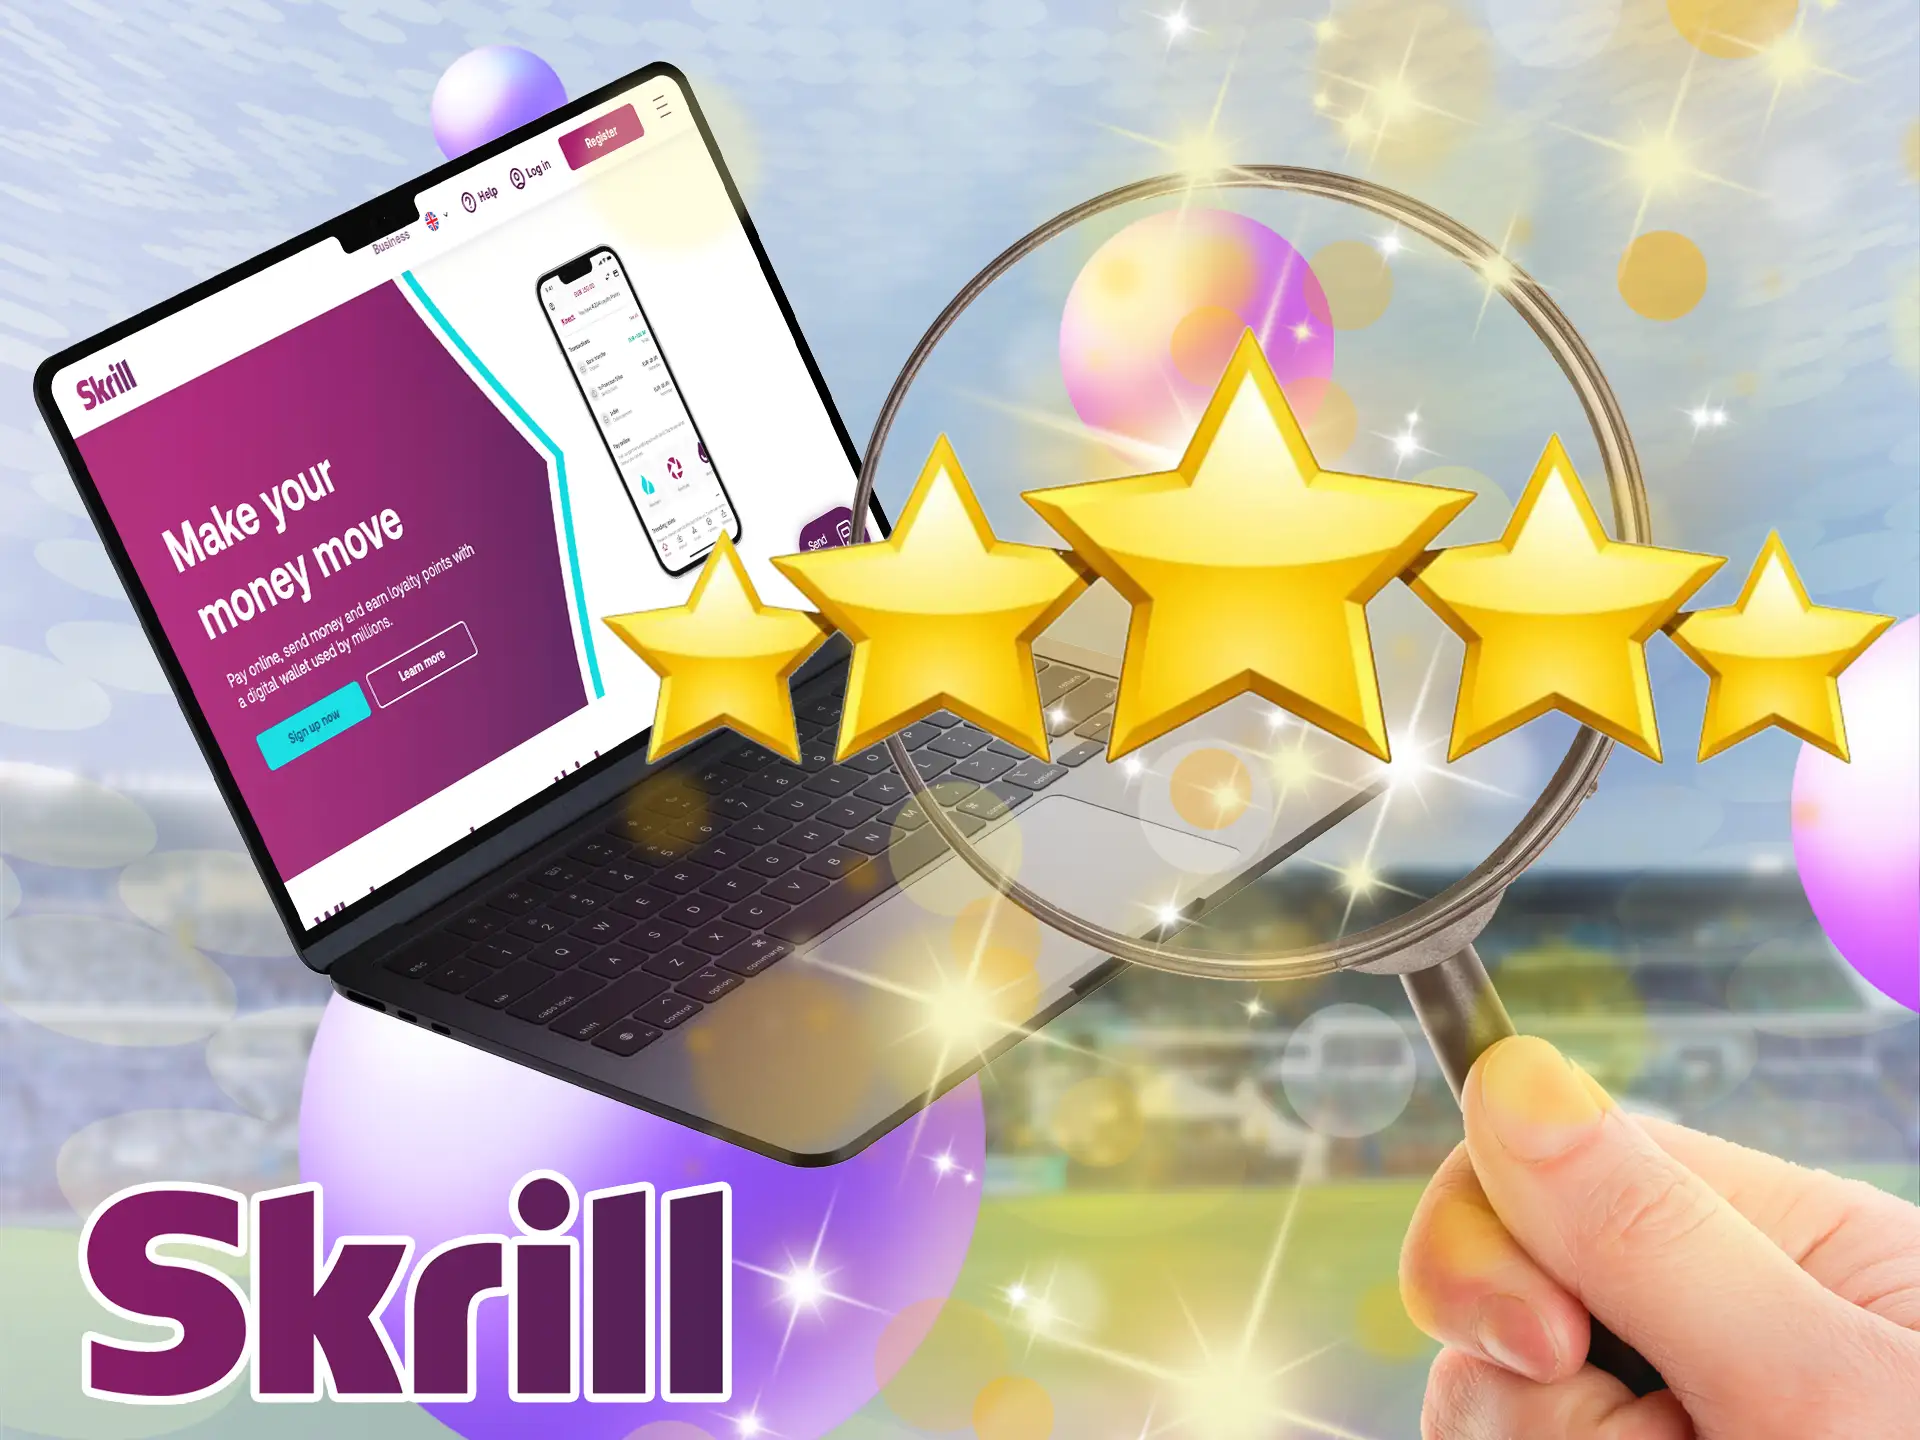 We'll help you learn about the convenient features of the most popular payment system, Skrill.